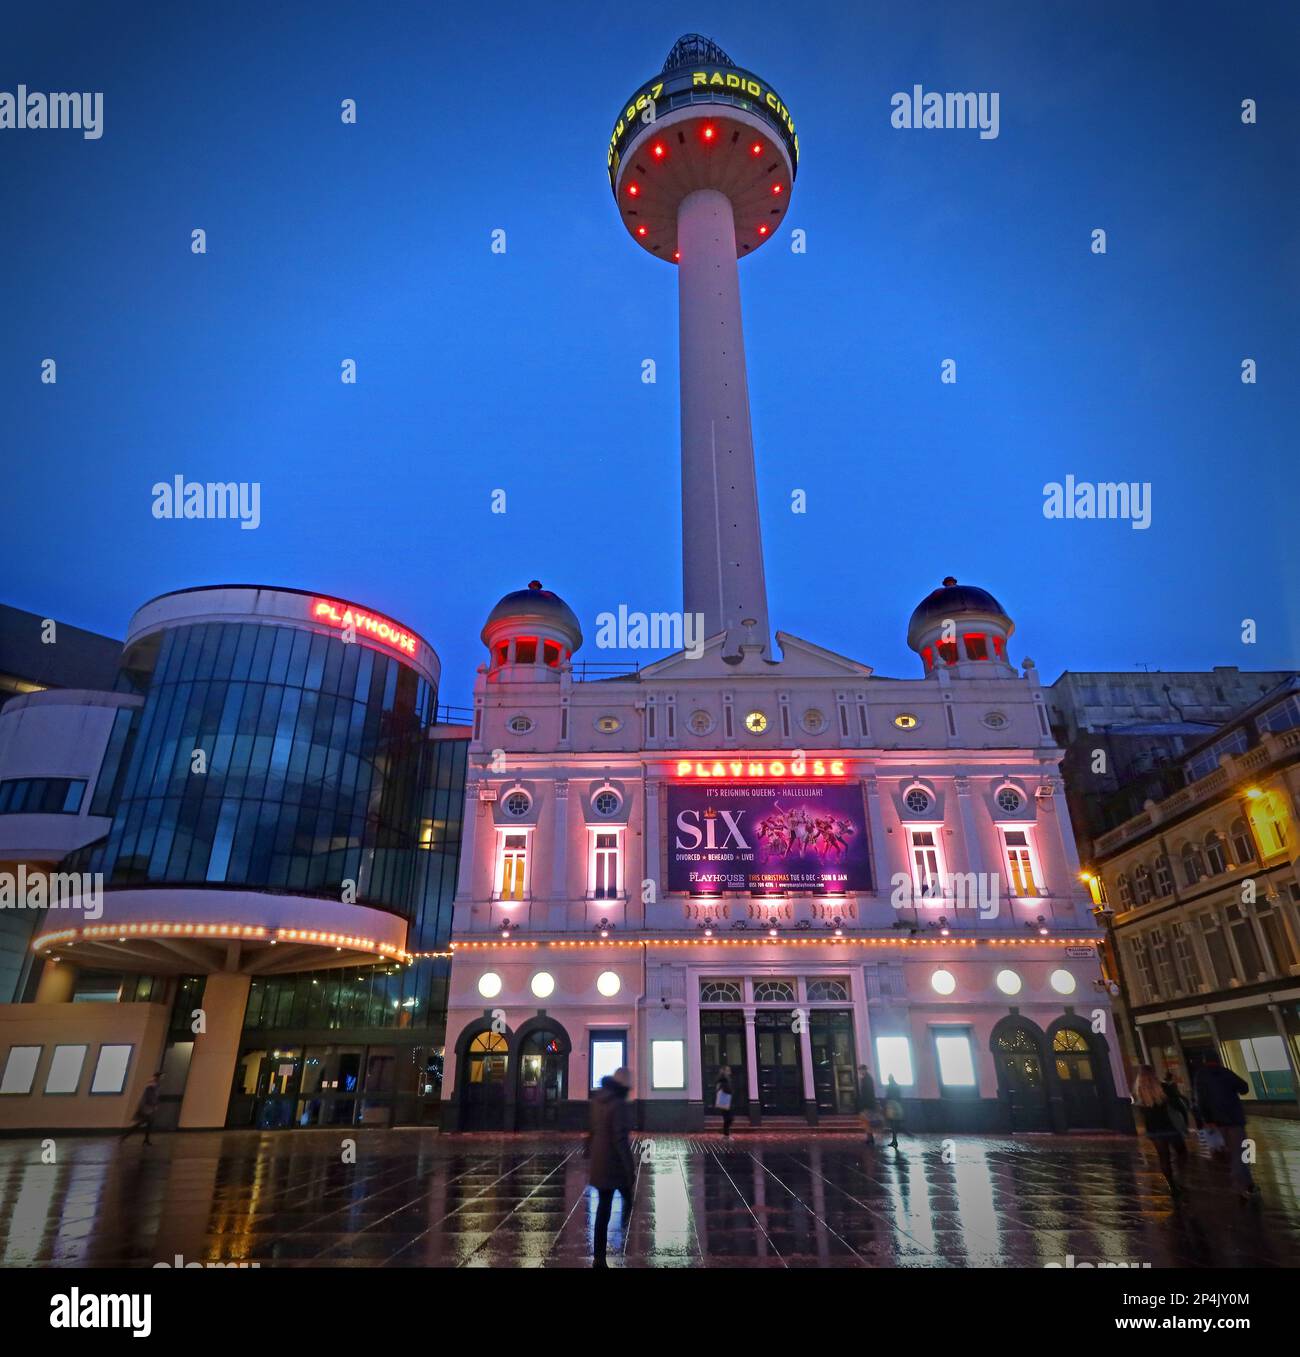 The Liverpool Playhouse Theatre with Radio City tower, at dusk, Williamson Square, Liverpool, Merseyside, England, UK, L1 1EL Stock Photo